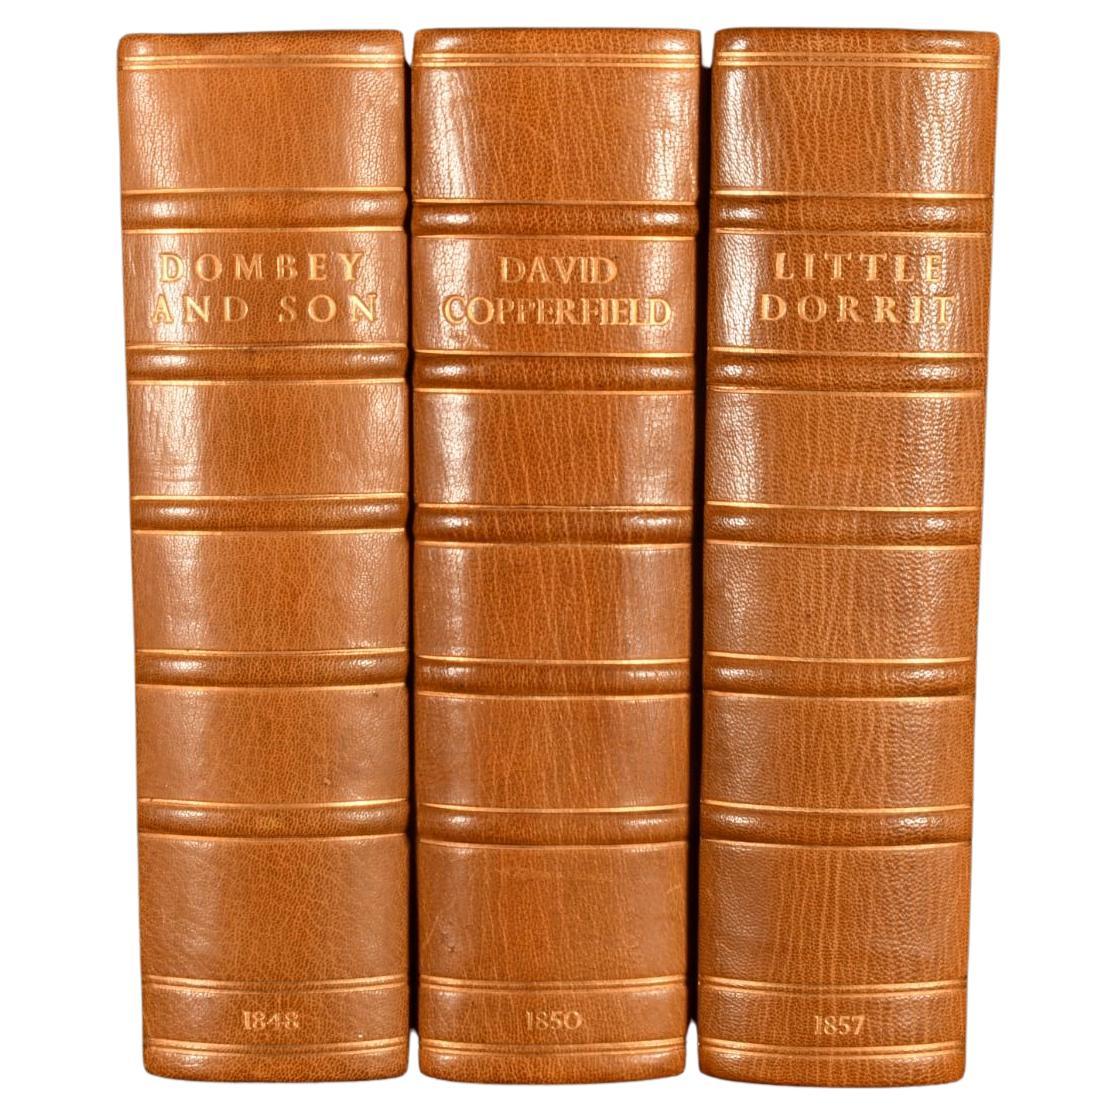 1848-1857 Dombey and Son, David Copperfield, Little Dorrit For Sale